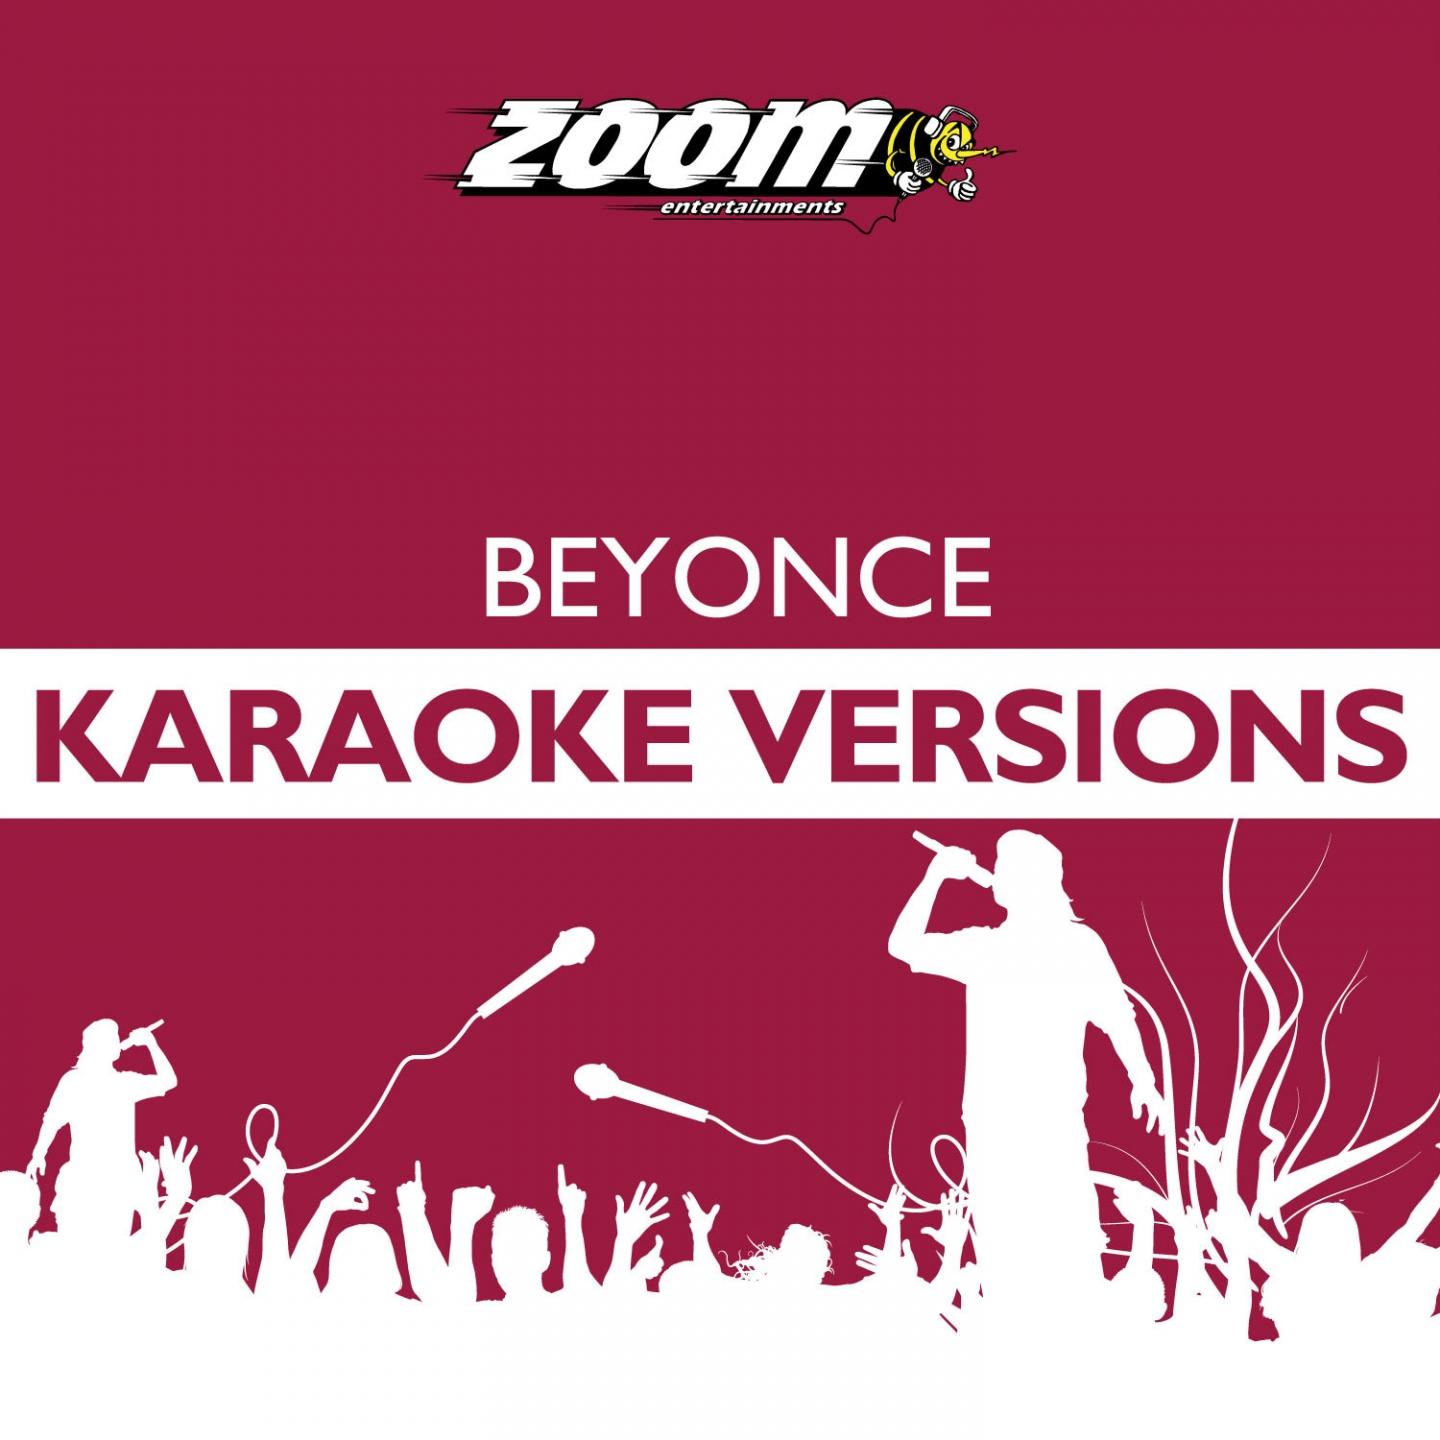 If I Were a Boy (Without Backing Vocals) [Karaoke Version] [Originally Performed By Beyonce]